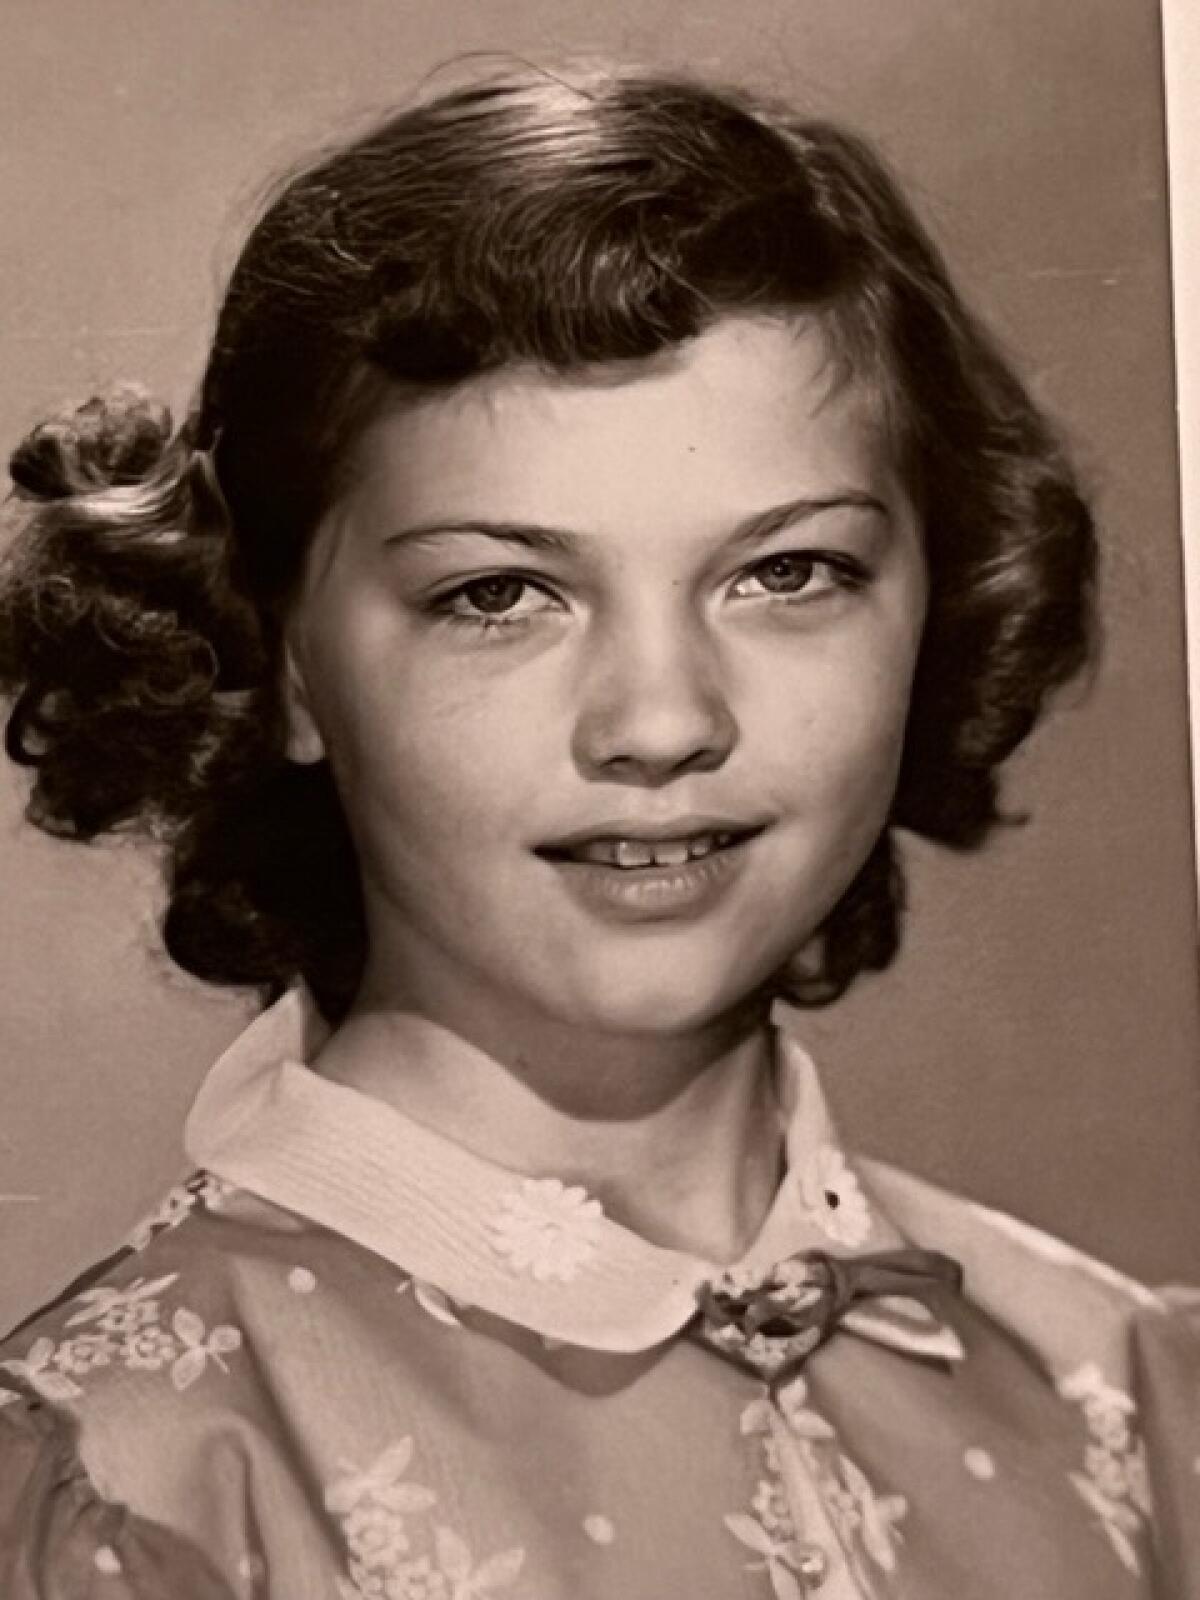 black-and-white headshot of a young girl